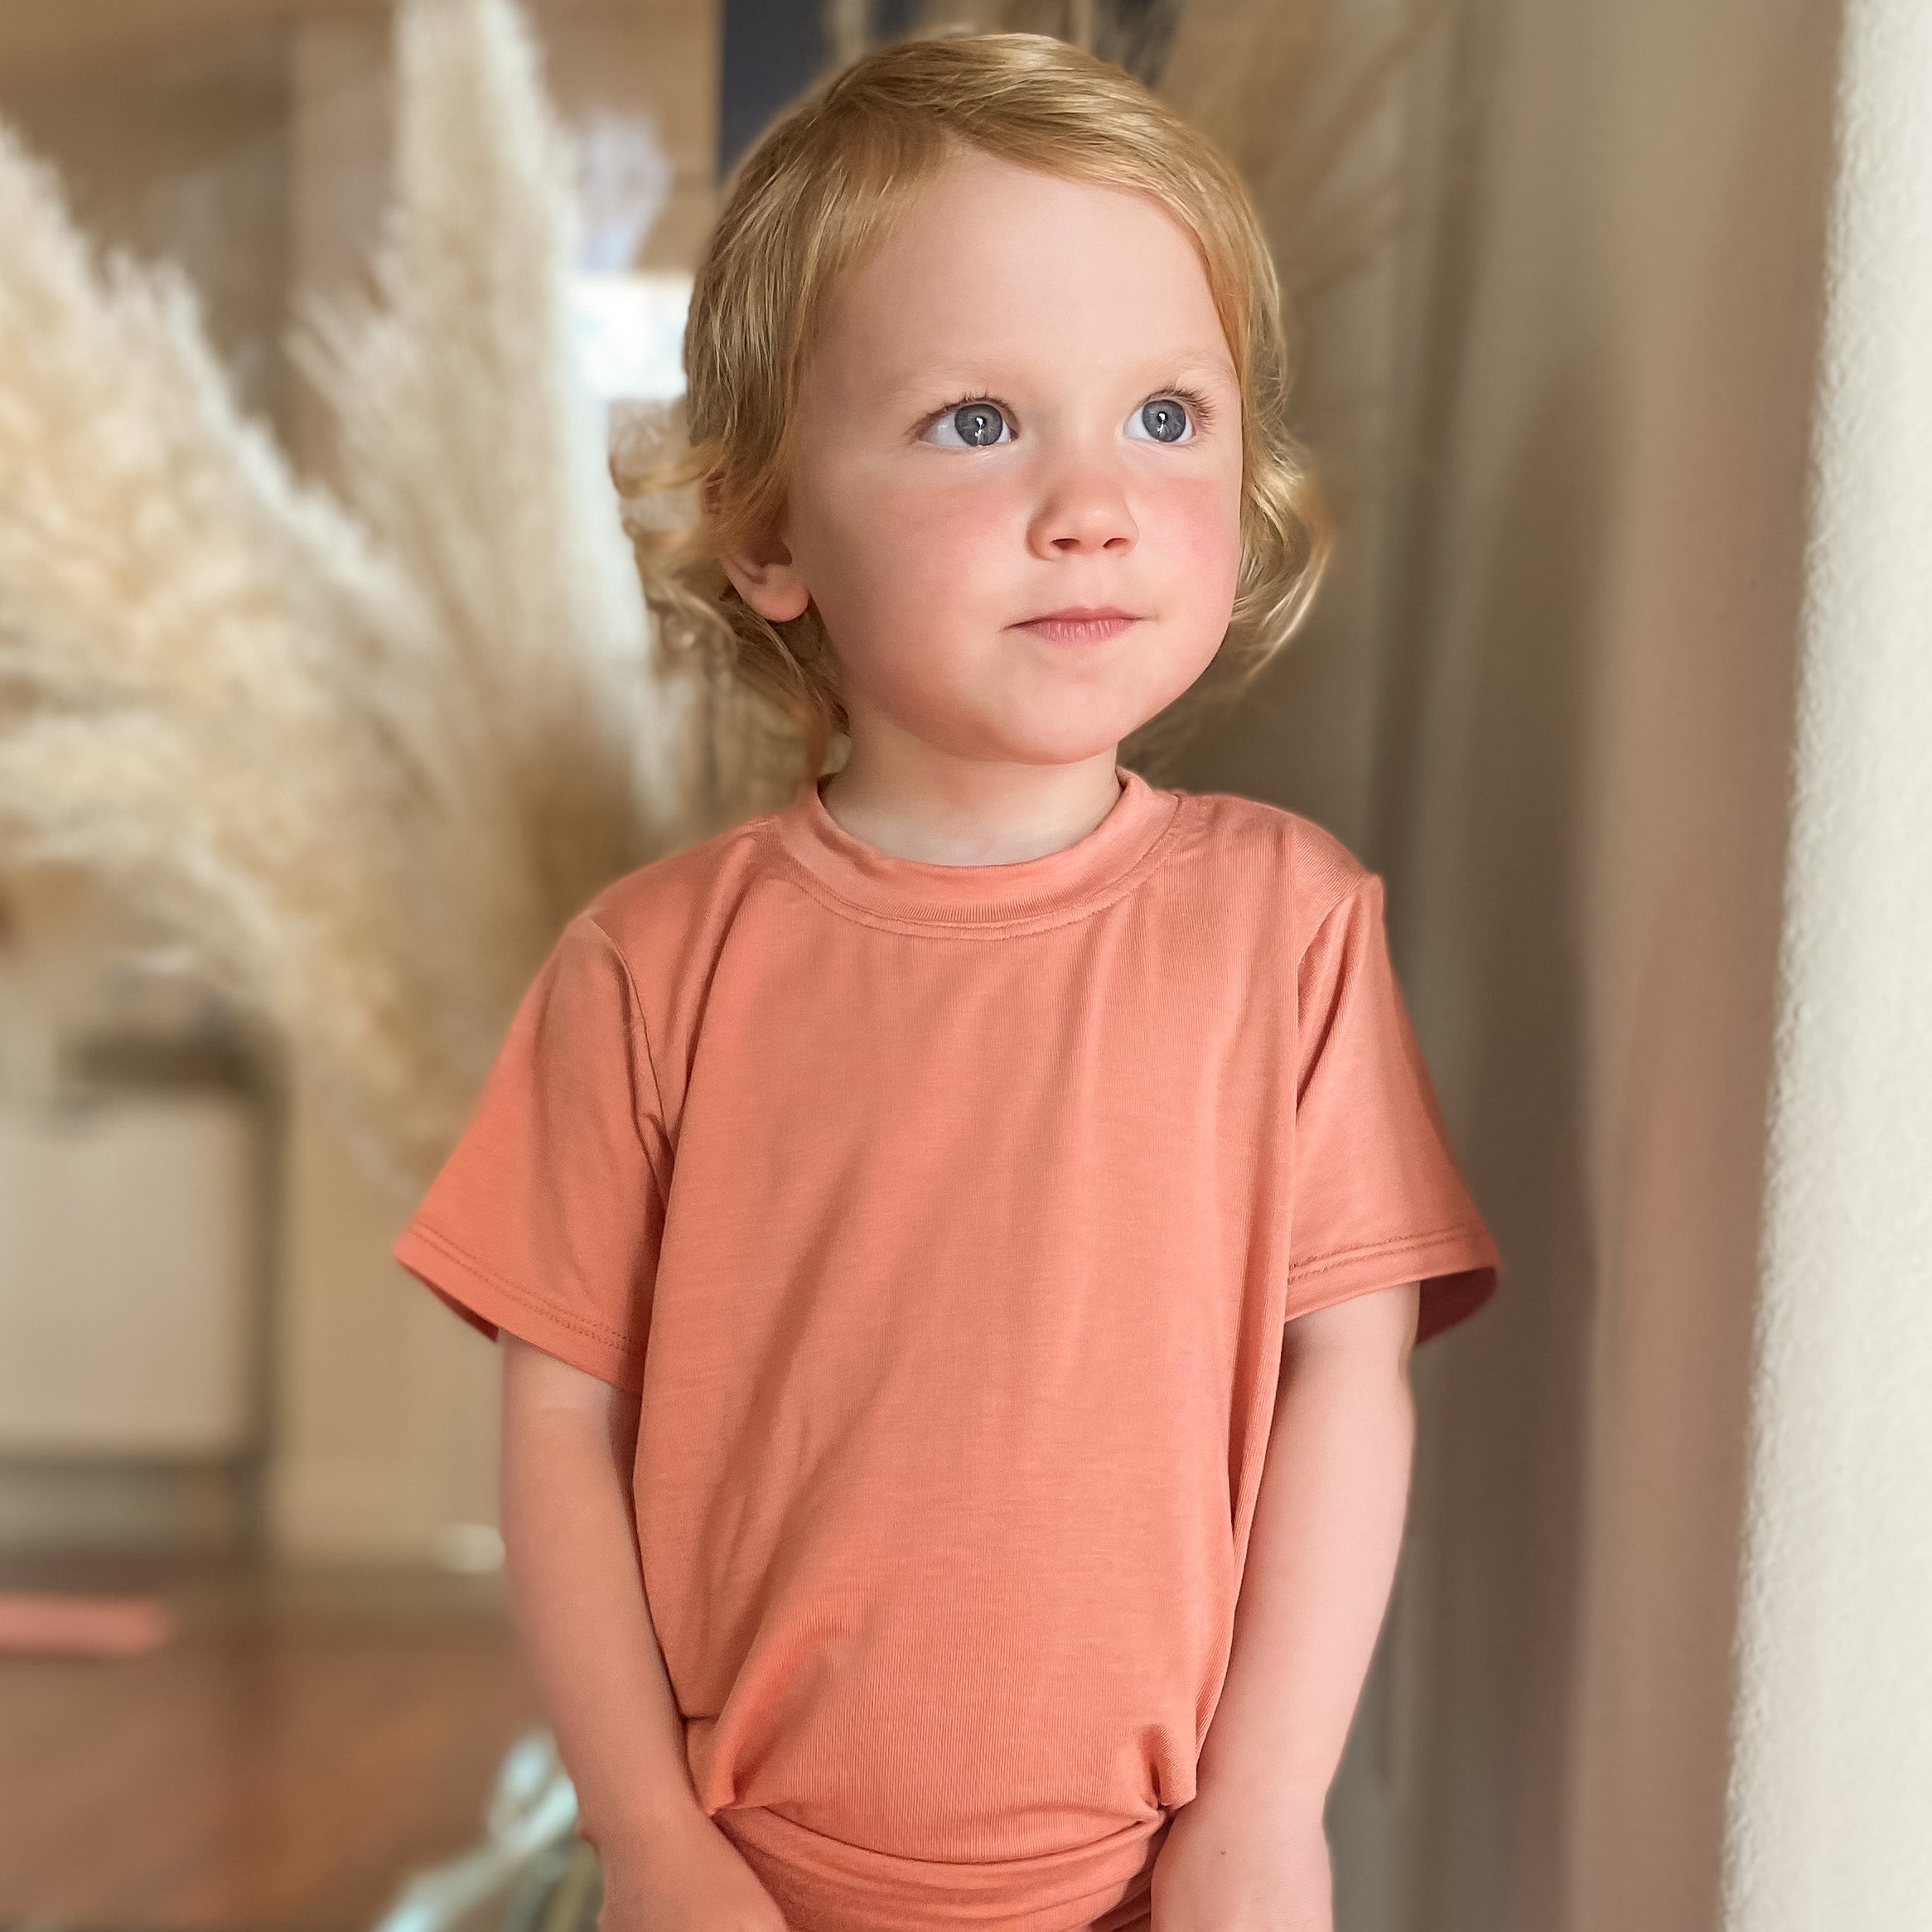 Bamboo Tee - Coral - Tenth and Pine - Organic Baby Clothes